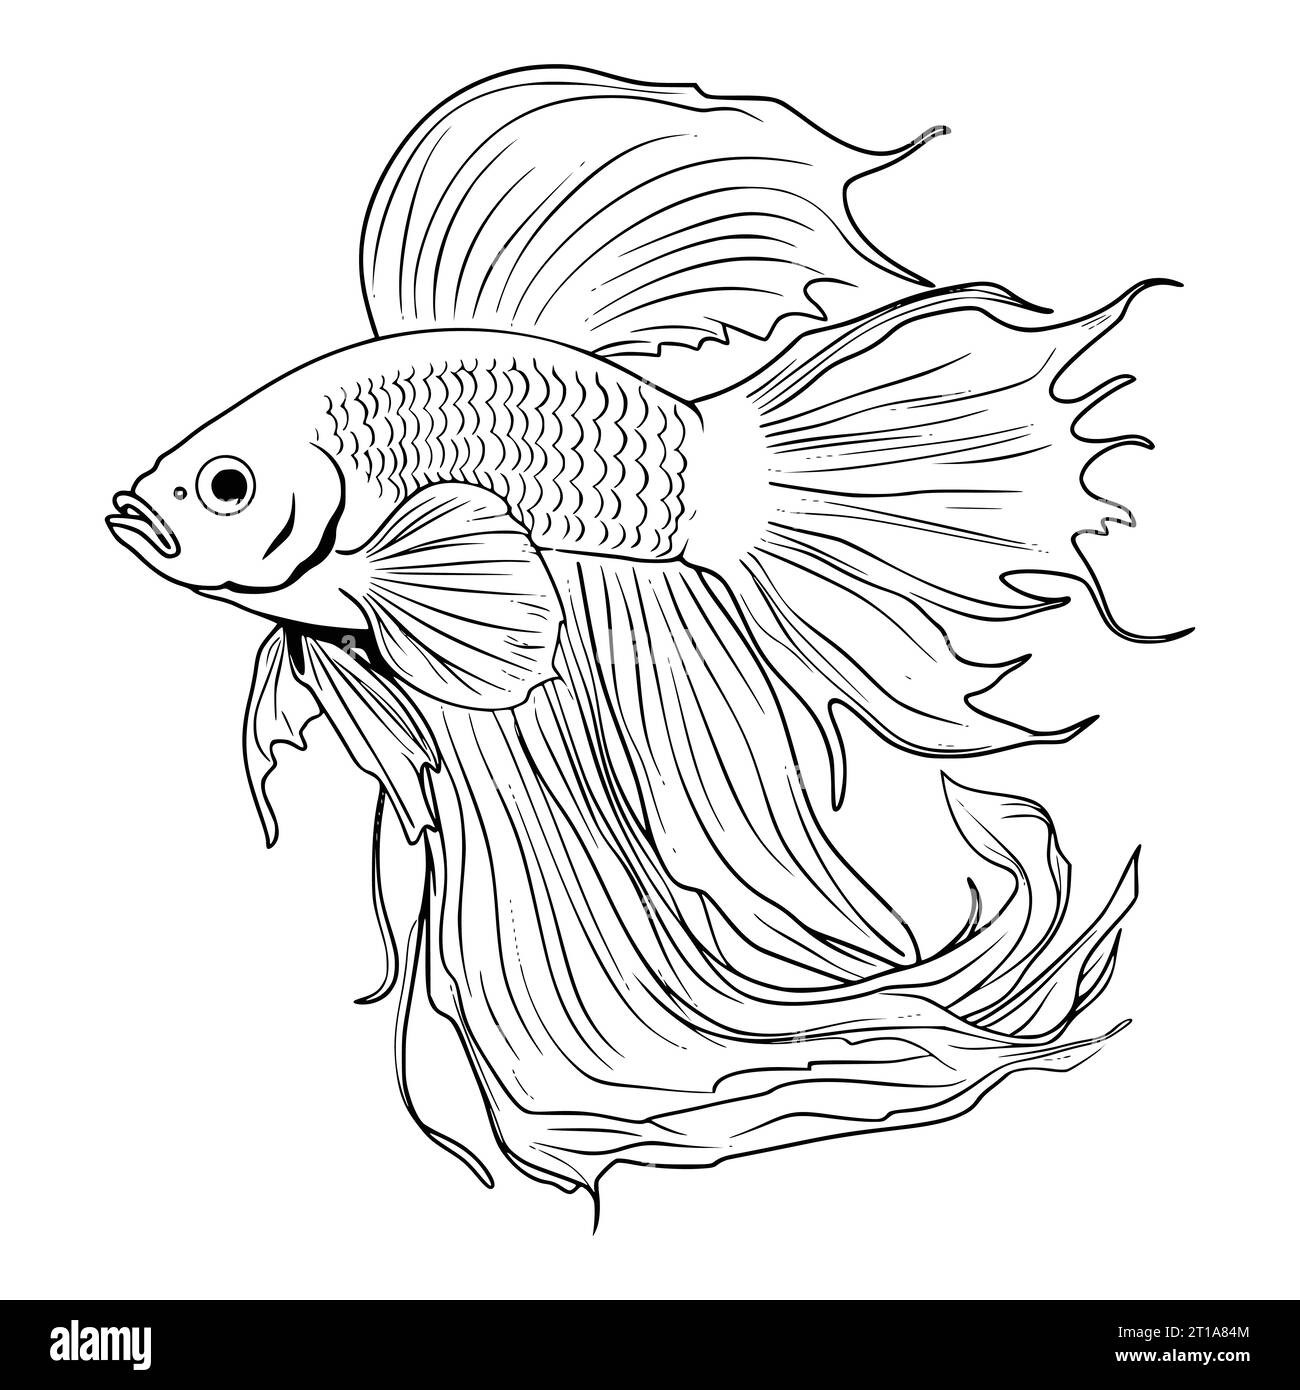 Fish coloring pages printable Cut Out Stock Images & Pictures - Alamy